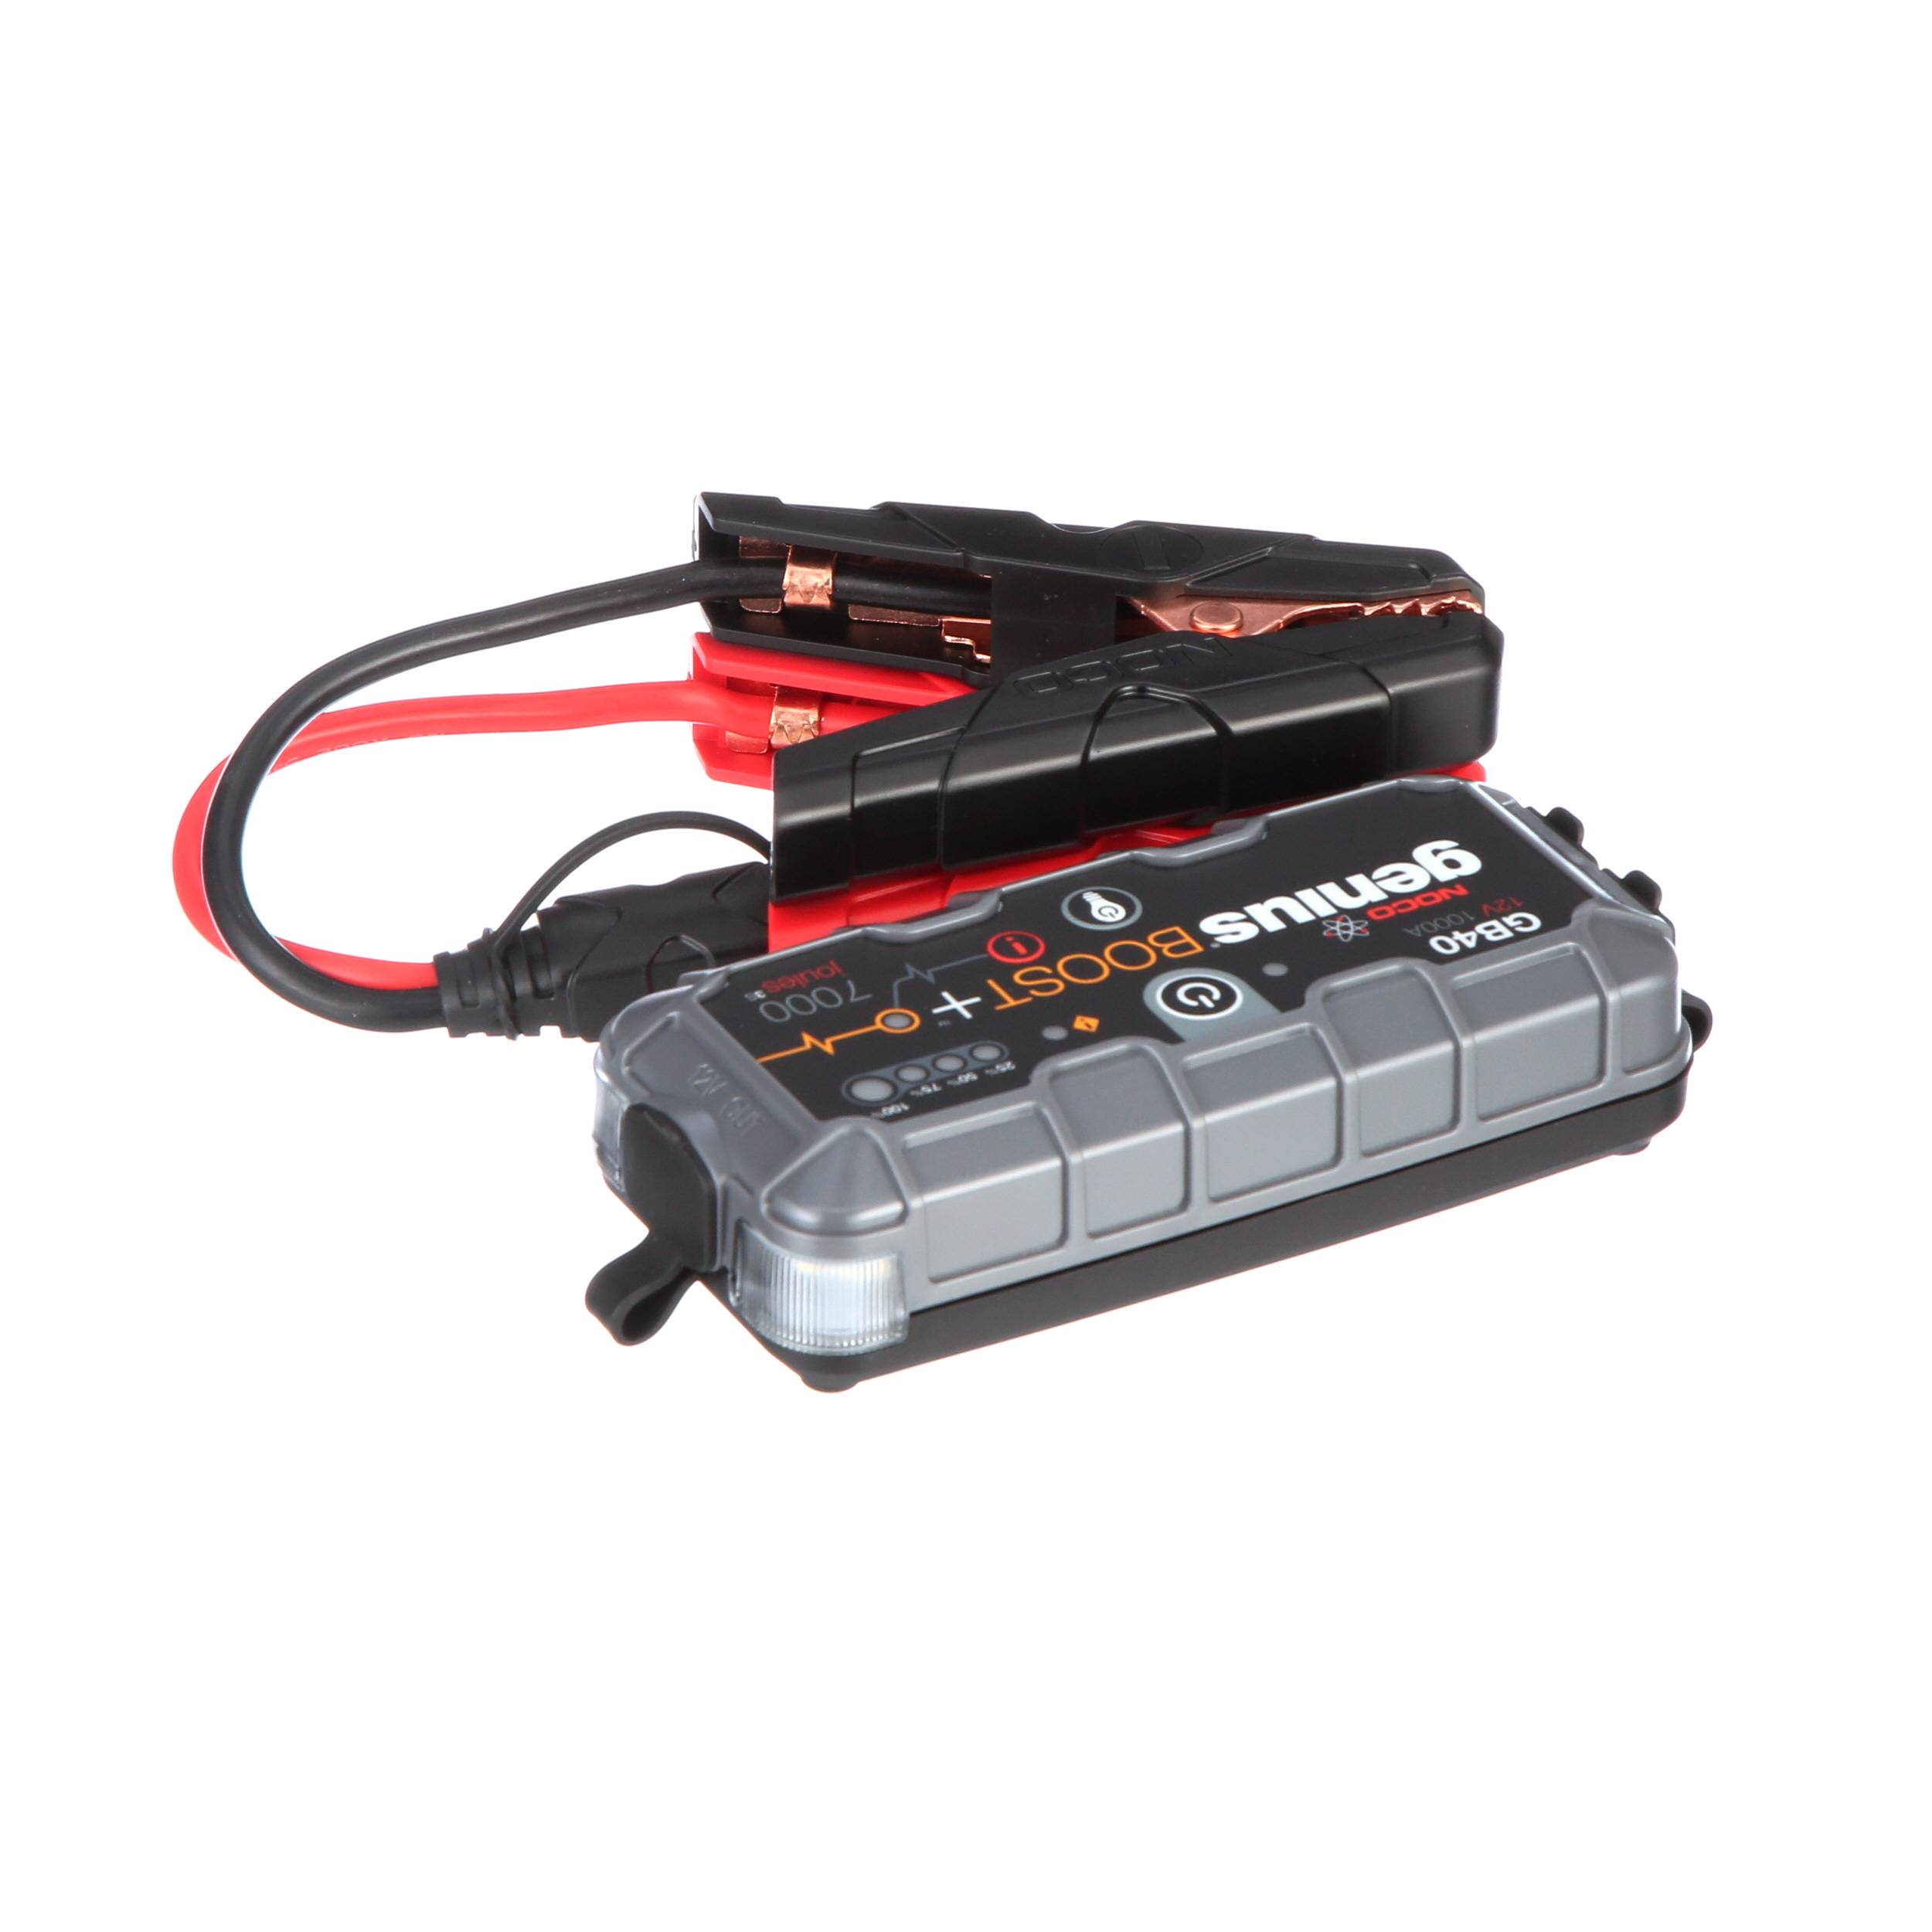 NOCO GB40 Lithium Power Pack and Jump Starter • Alfaholics